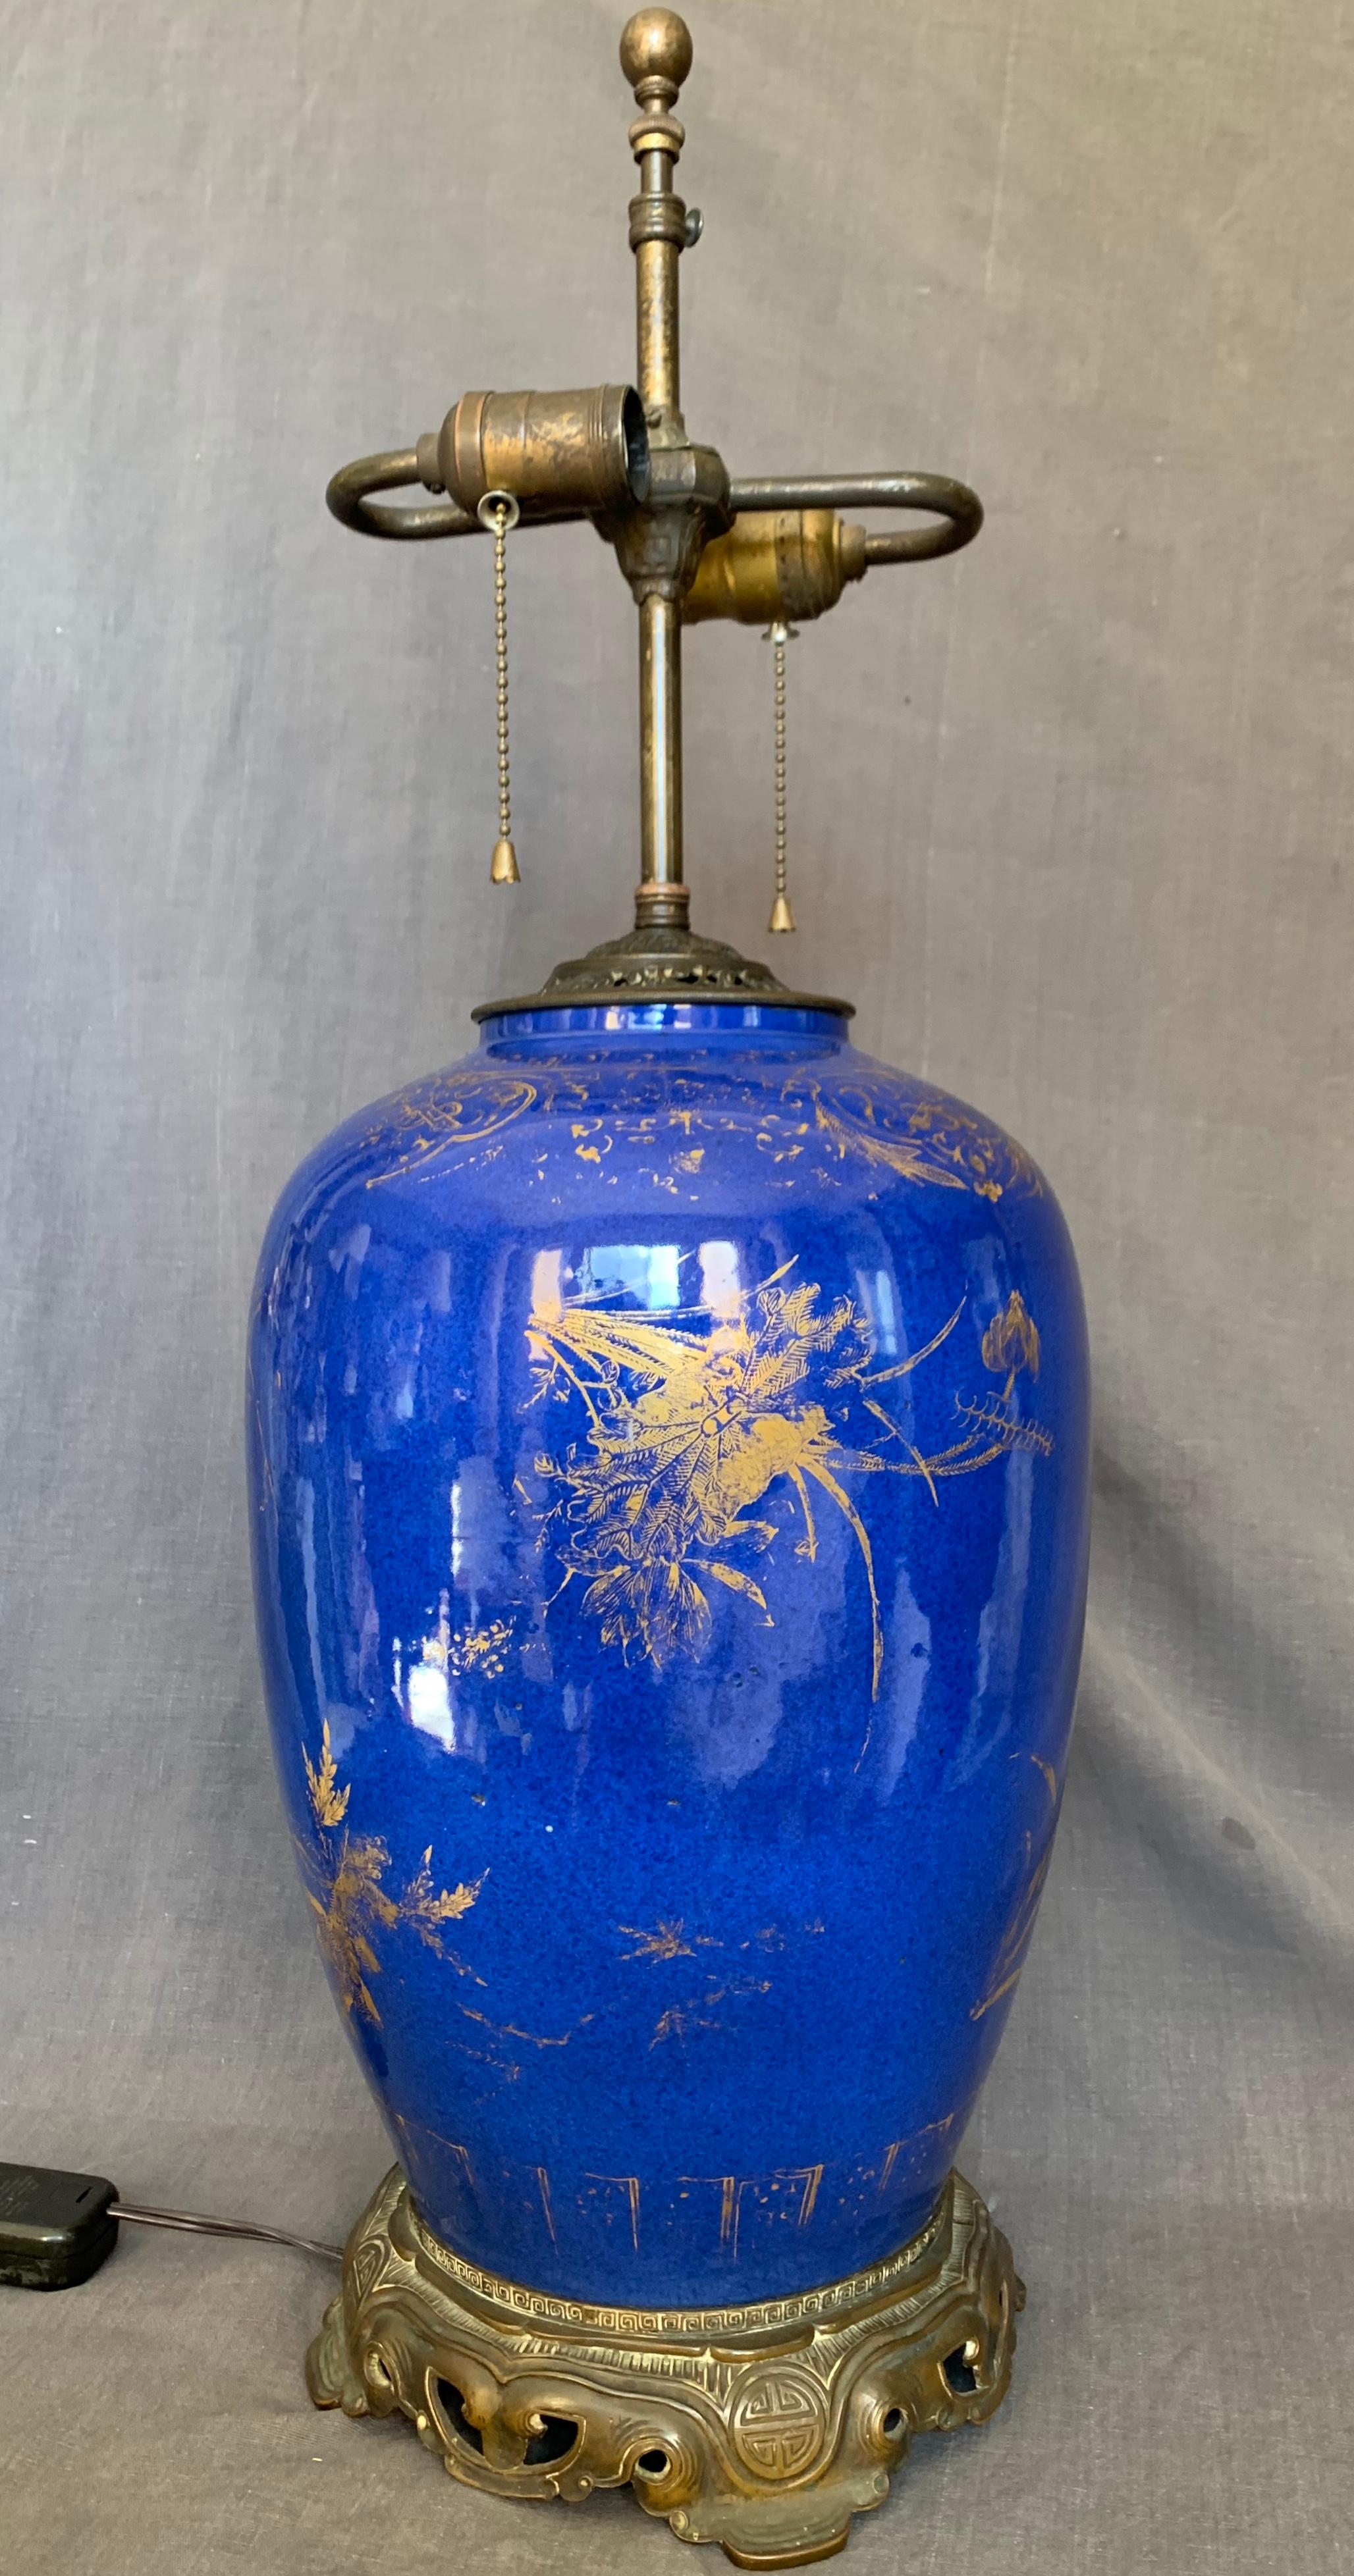 Large powder blue and gilt Kangxi lamp Large Kangxi style vase previously drilled and with custom Oriental motif bronze mounts fitted for electricity with two bulb stem and cord with switch, China, 18th century.
Dimensions: 10